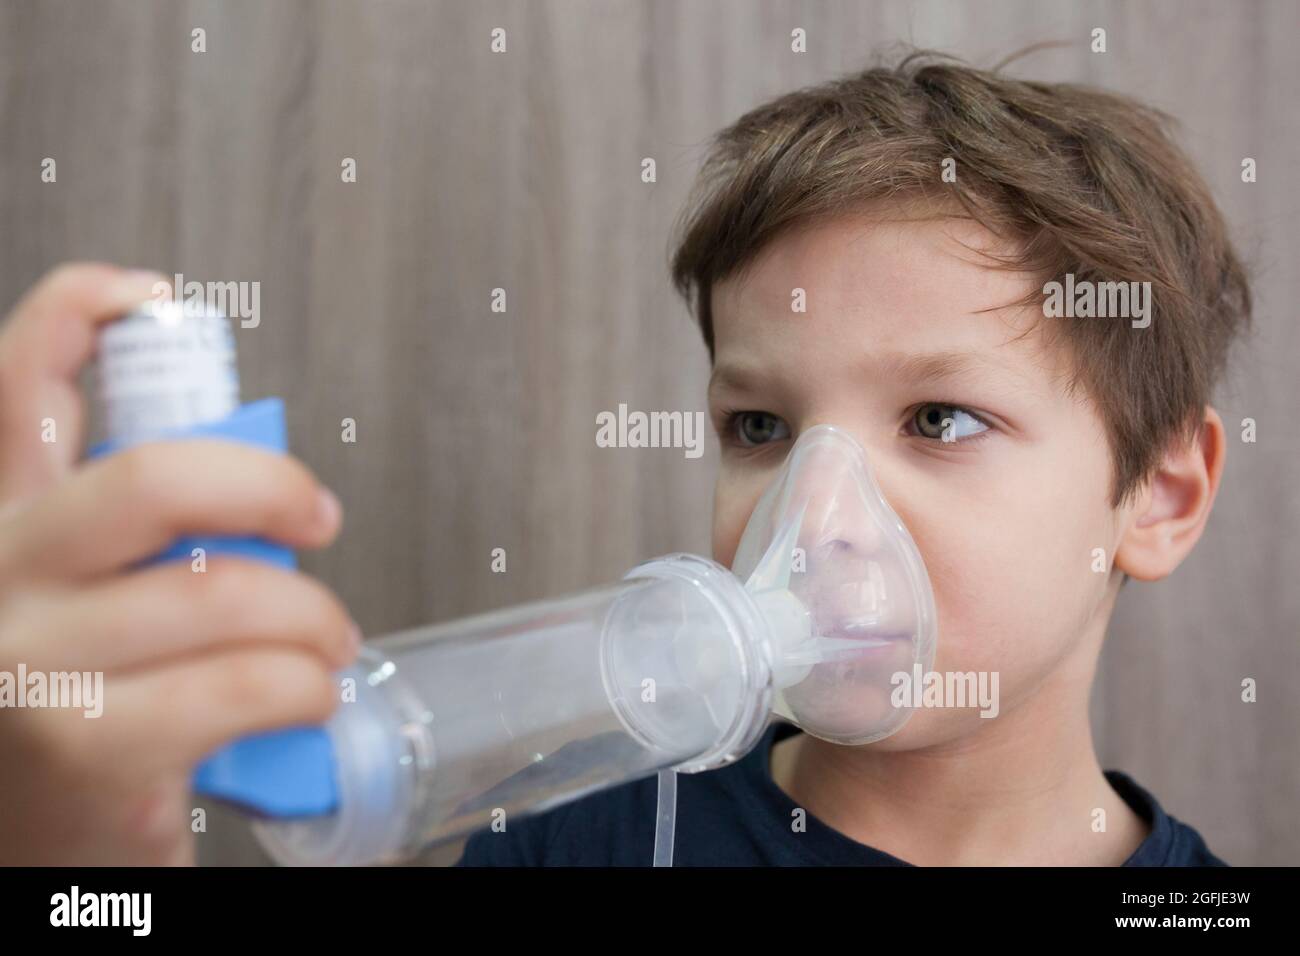 Child boy using medical spray for breath. Inhaler, spacer and mask. Side view Stock Photo